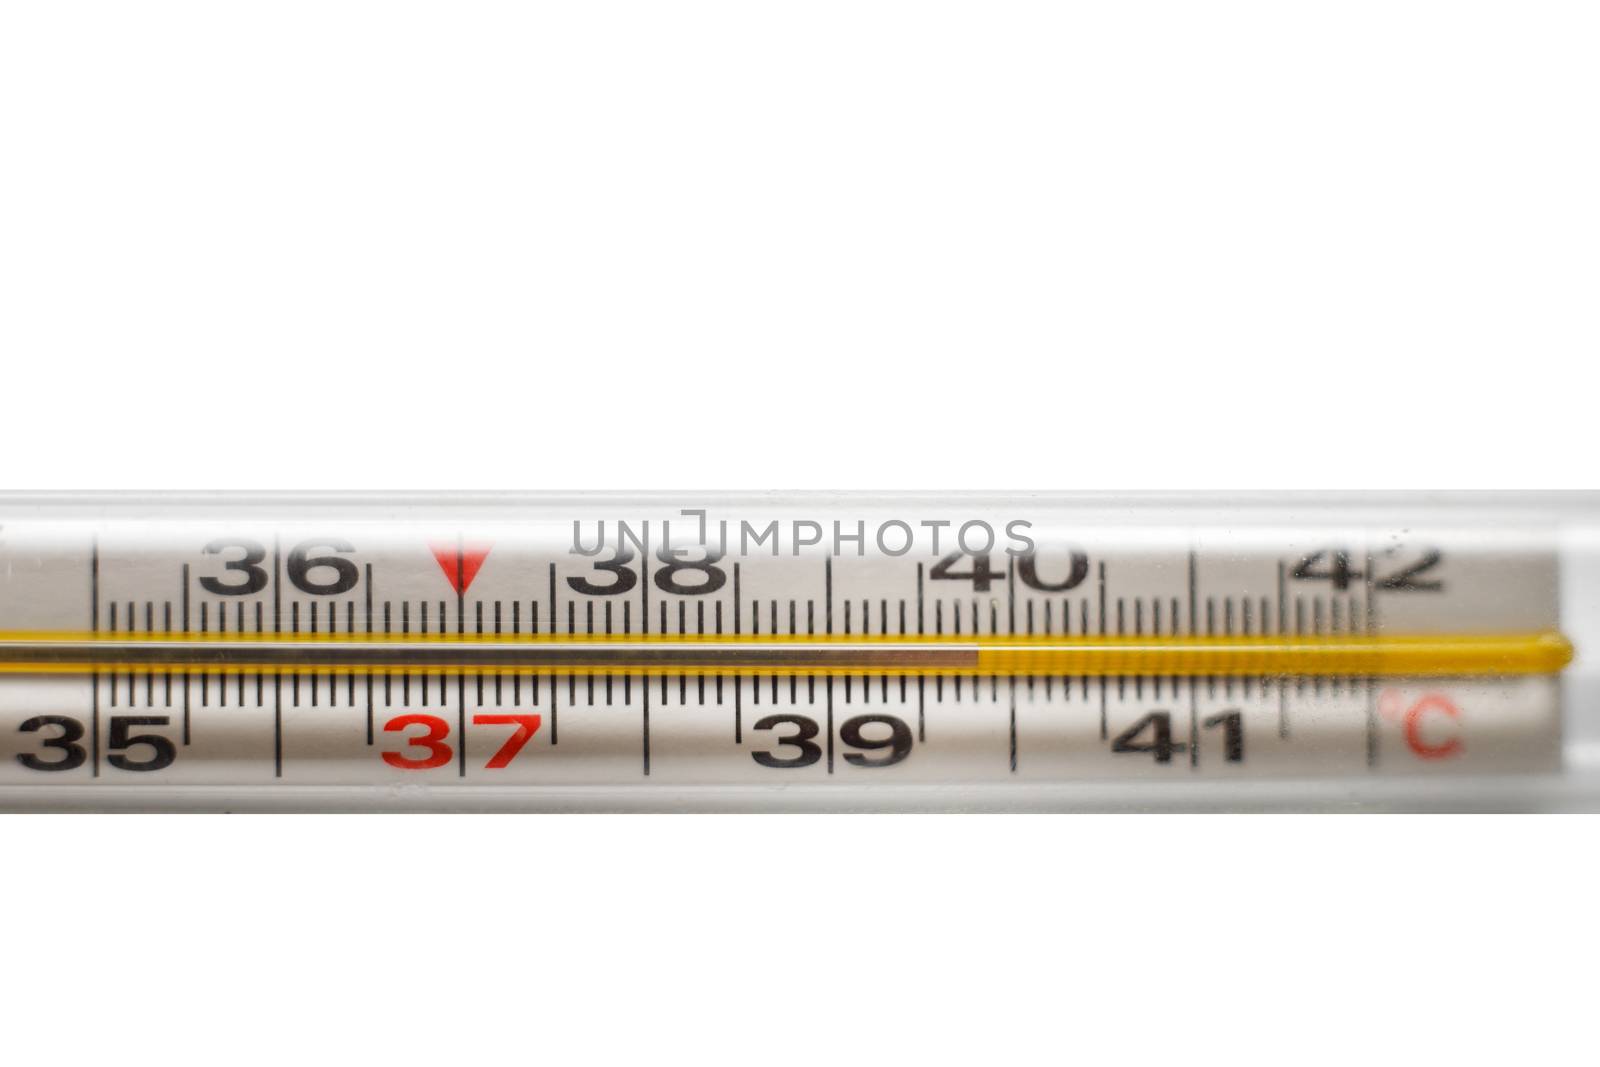 High temperature on a mercury thermometer by 9parusnikov